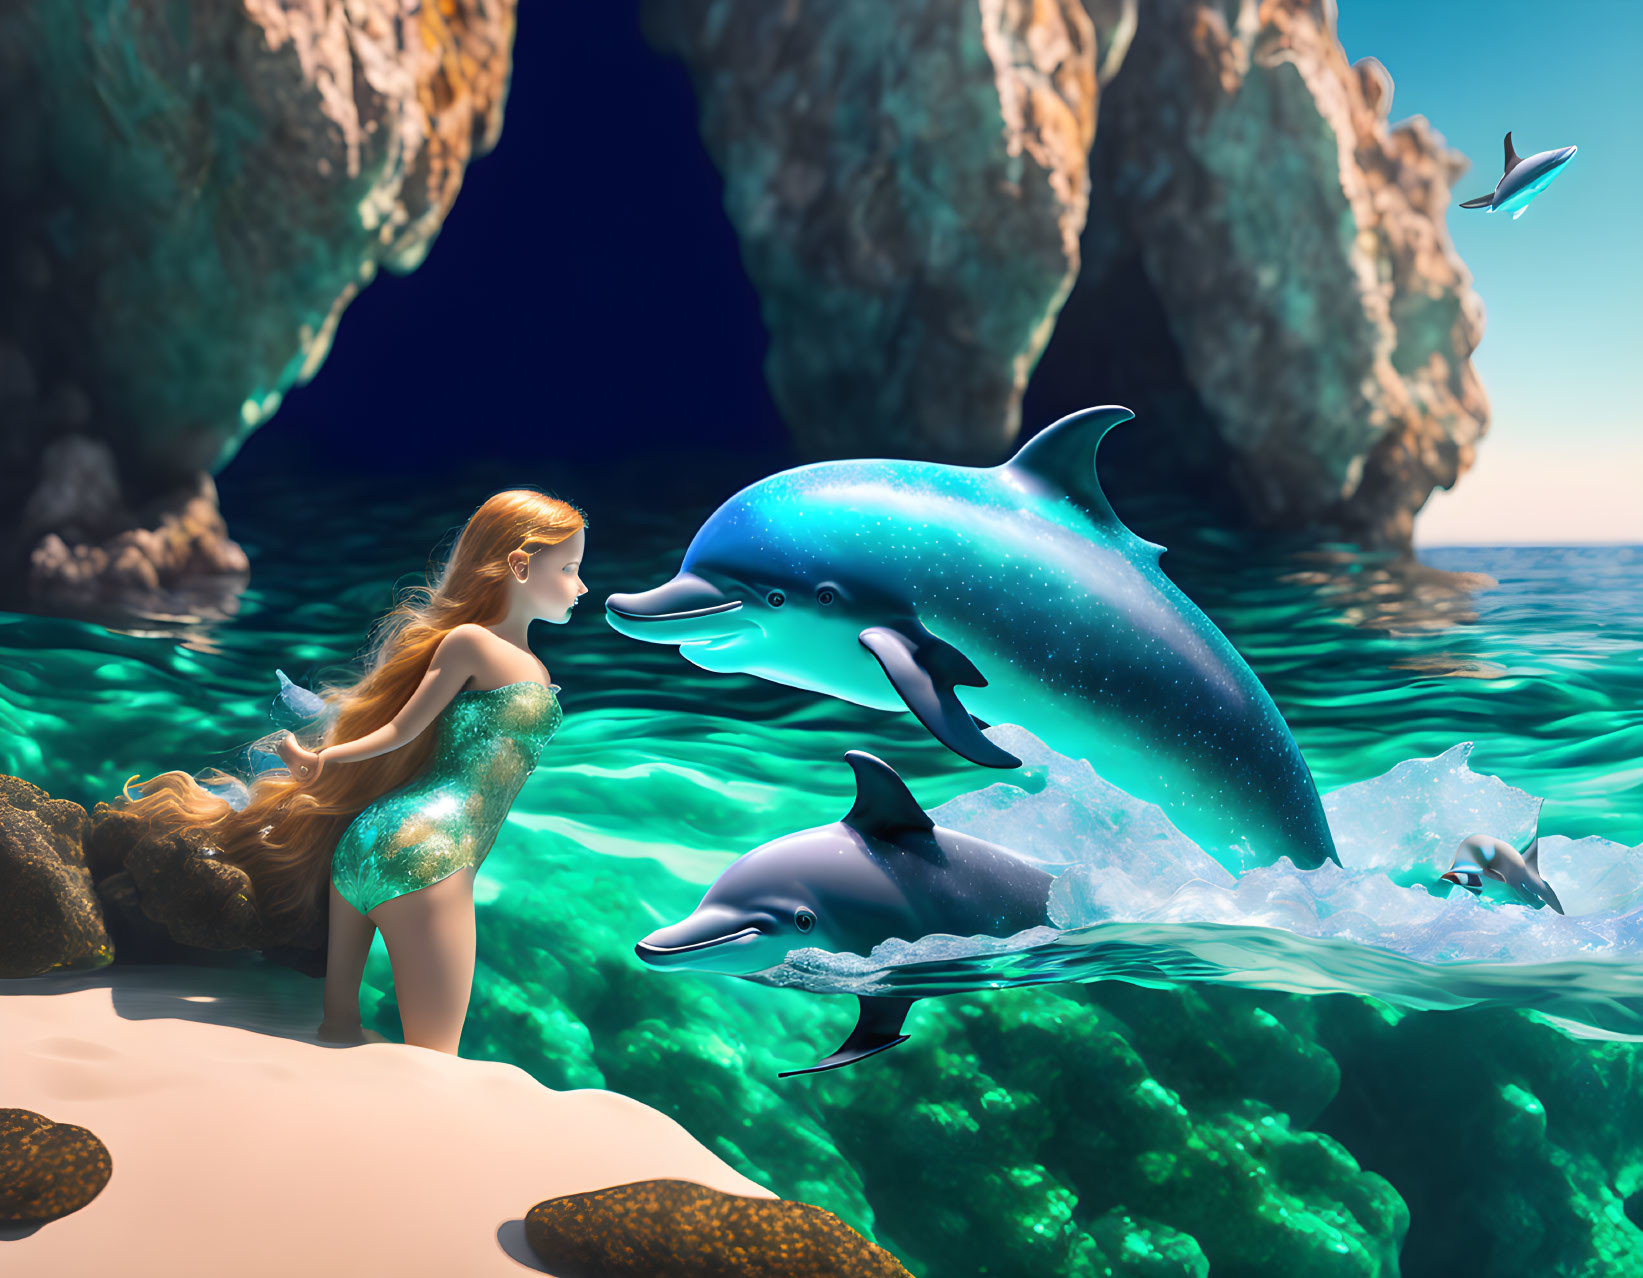 Ondine playing with dolphins